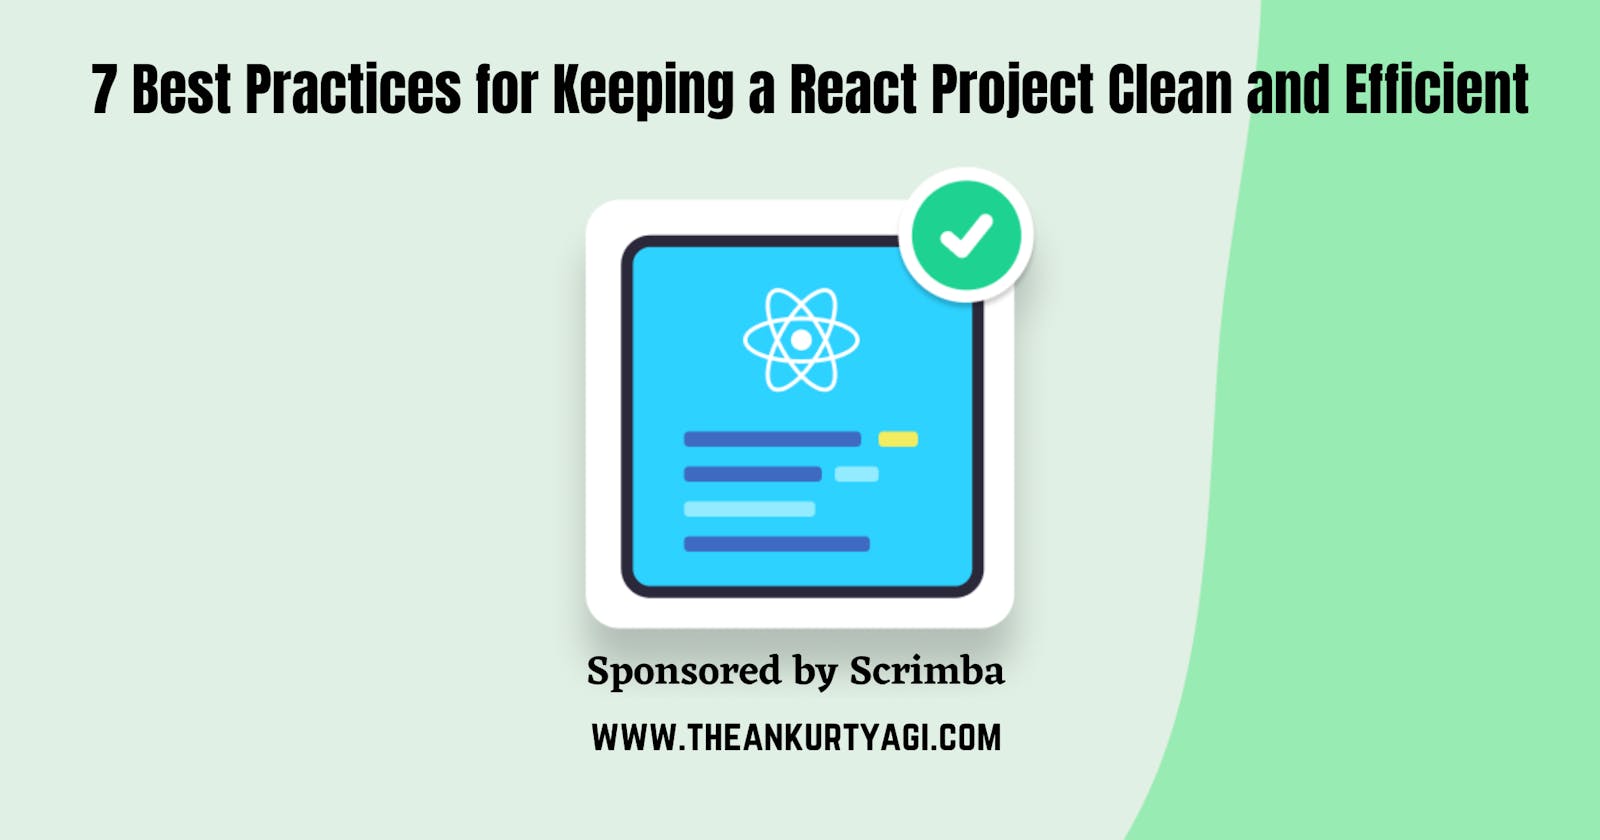 7 Best Practices for Keeping a React Project Clean and Efficient